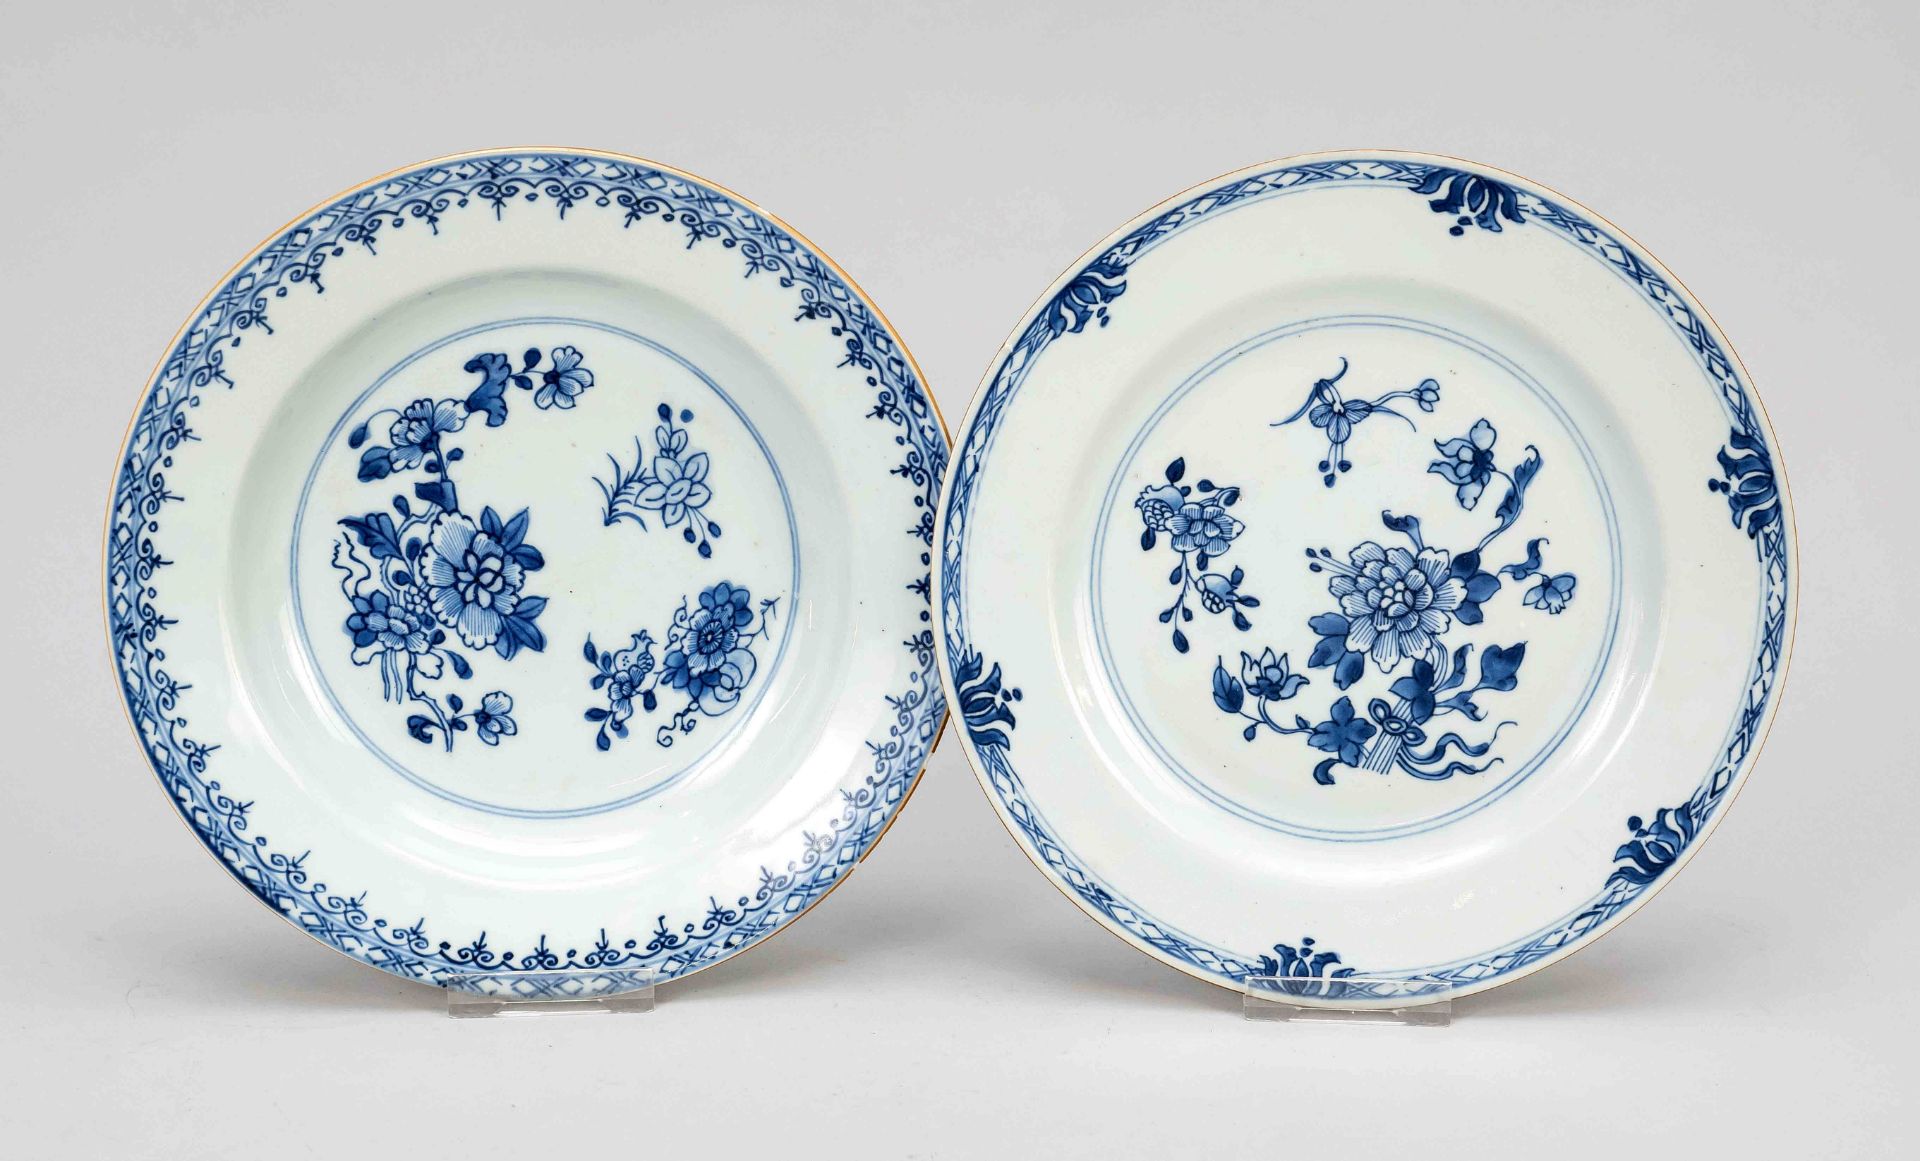 Chinese export plate set for European soup, China, Qing dynasty(1644-1912), shallow and deep